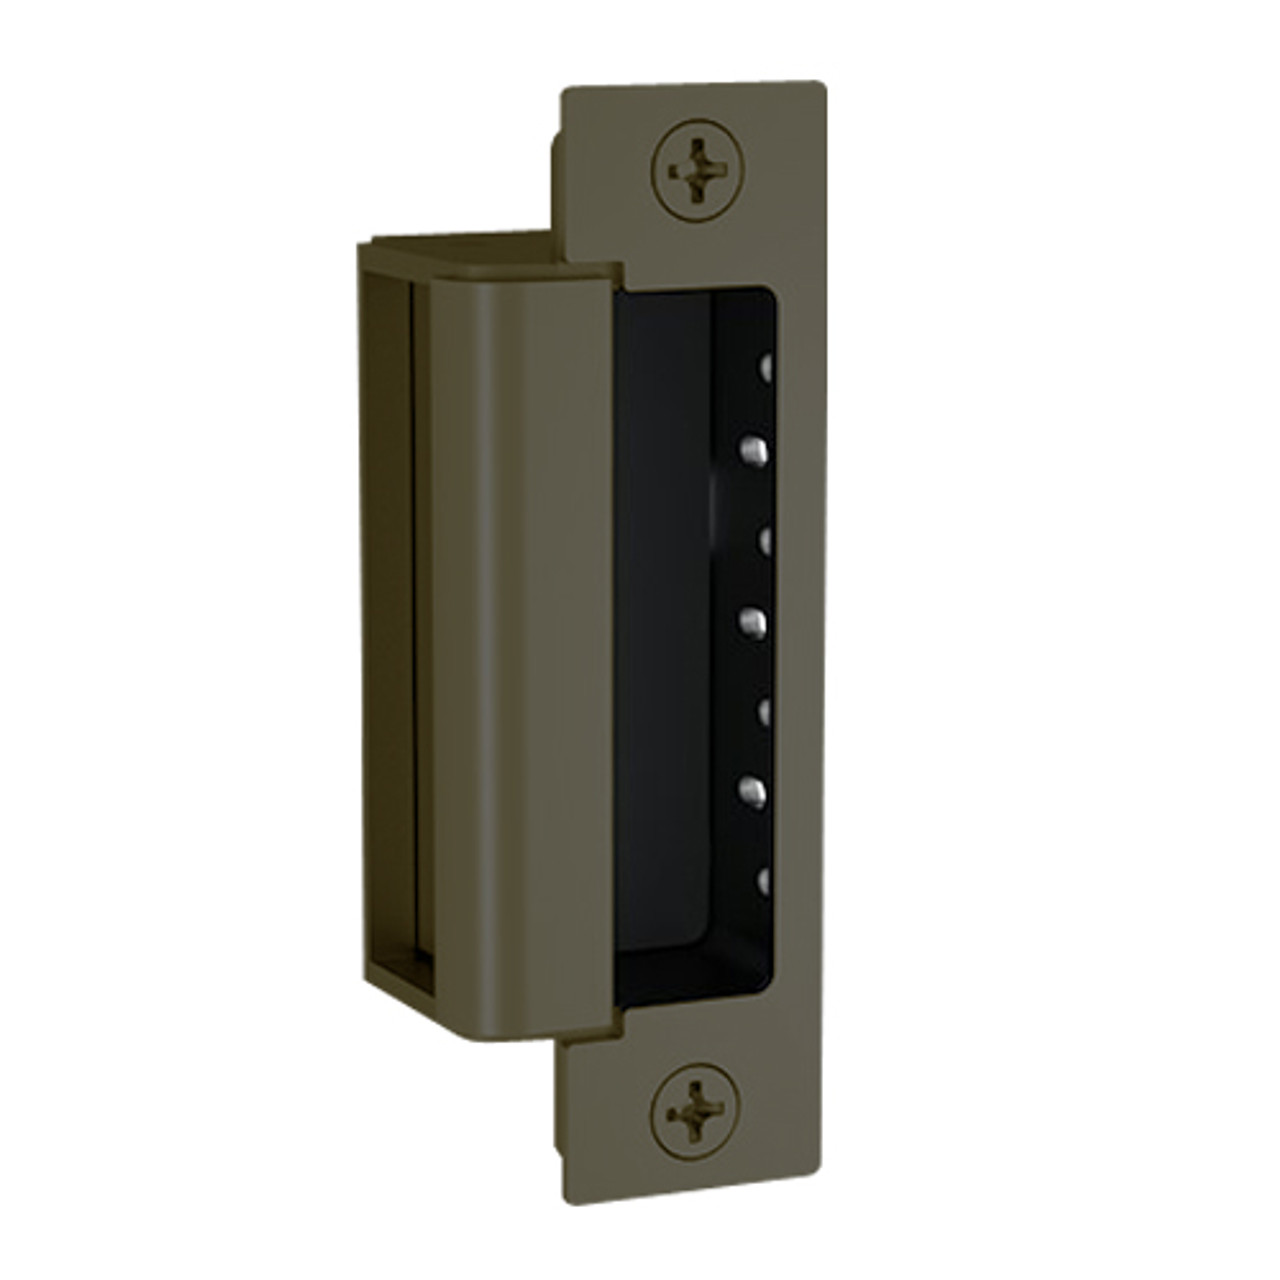 1600-CS-LM-613E Hes 1600 Series Dynamic Complete Low Profile Electric Strike for Latchbolt and Deadbolt Lock with Lock Monitor in Dark Oxidized Satin Bronze